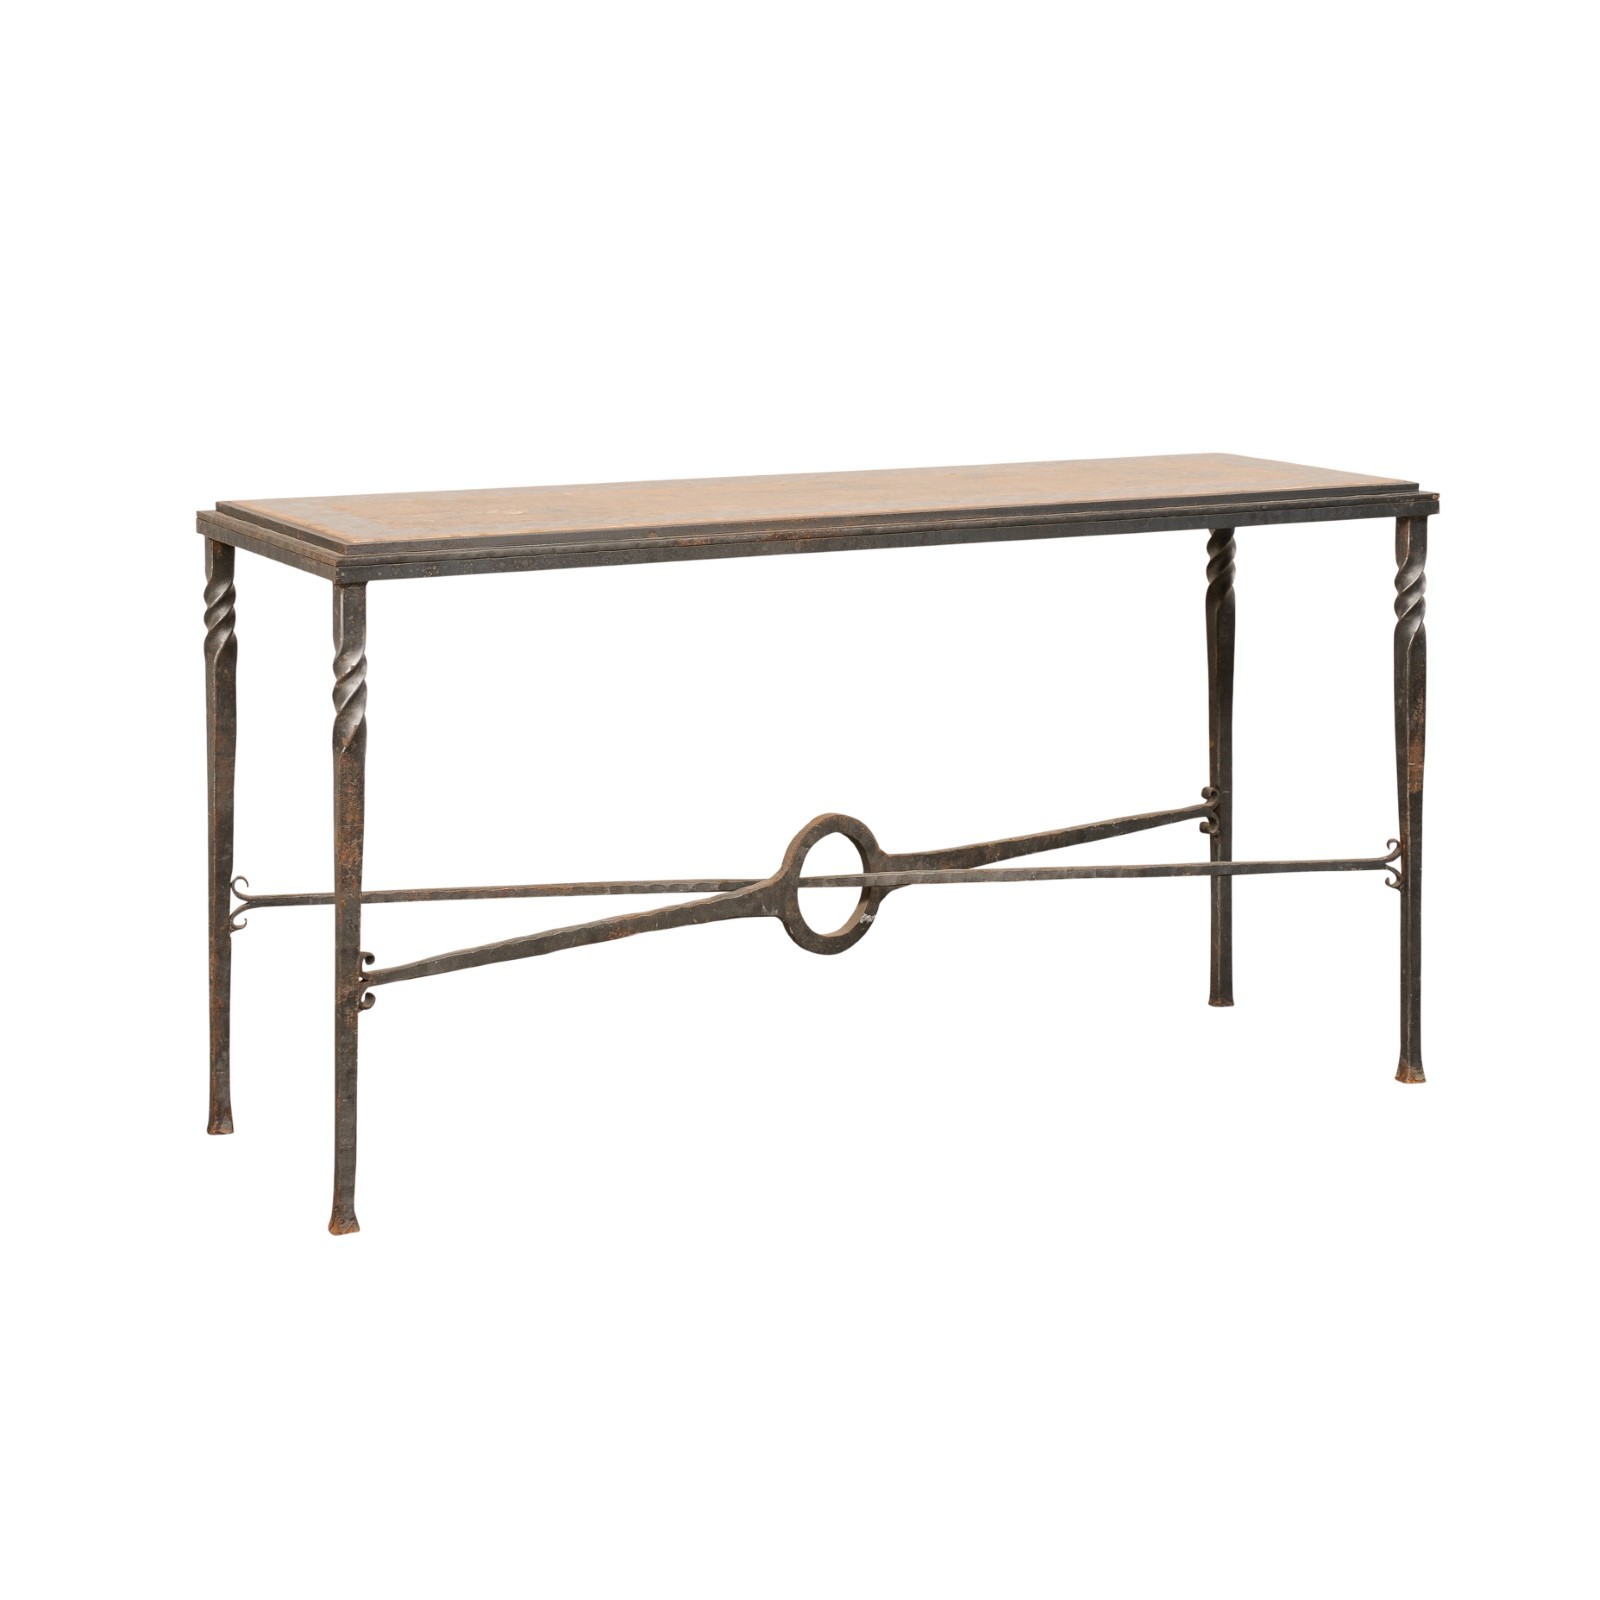 Mosaic Stone Top Console Table w/Iron Base